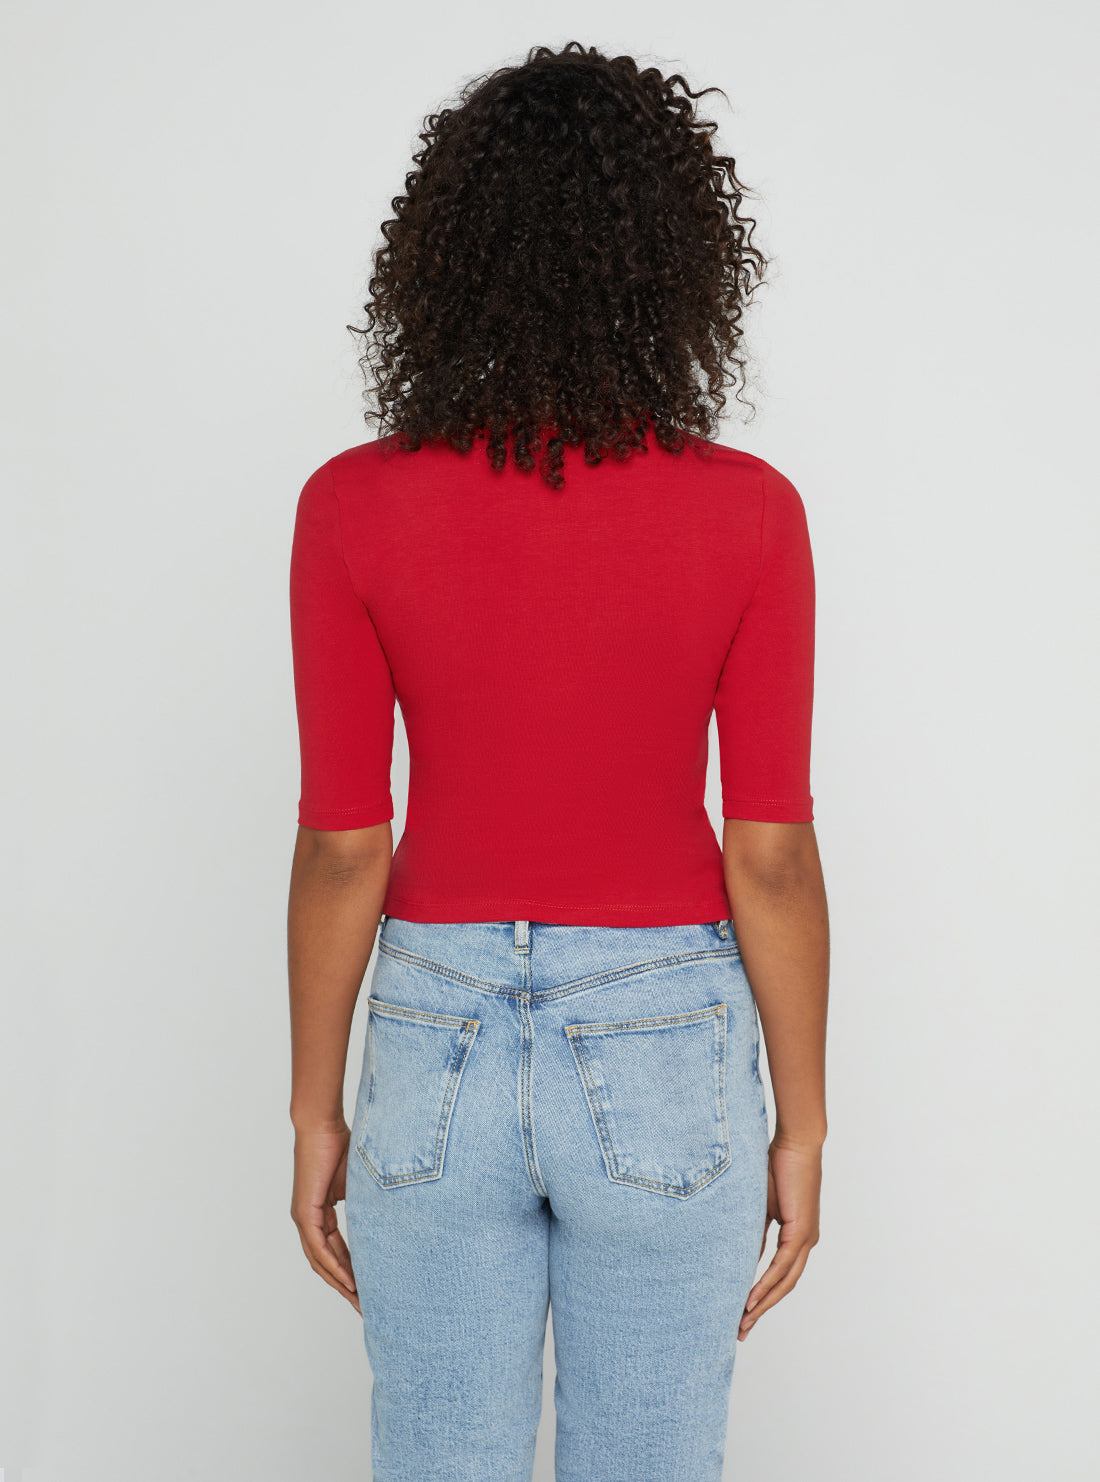 GUESS Womens Red Golden Rabbit Cropped Logo T-Shirt back view